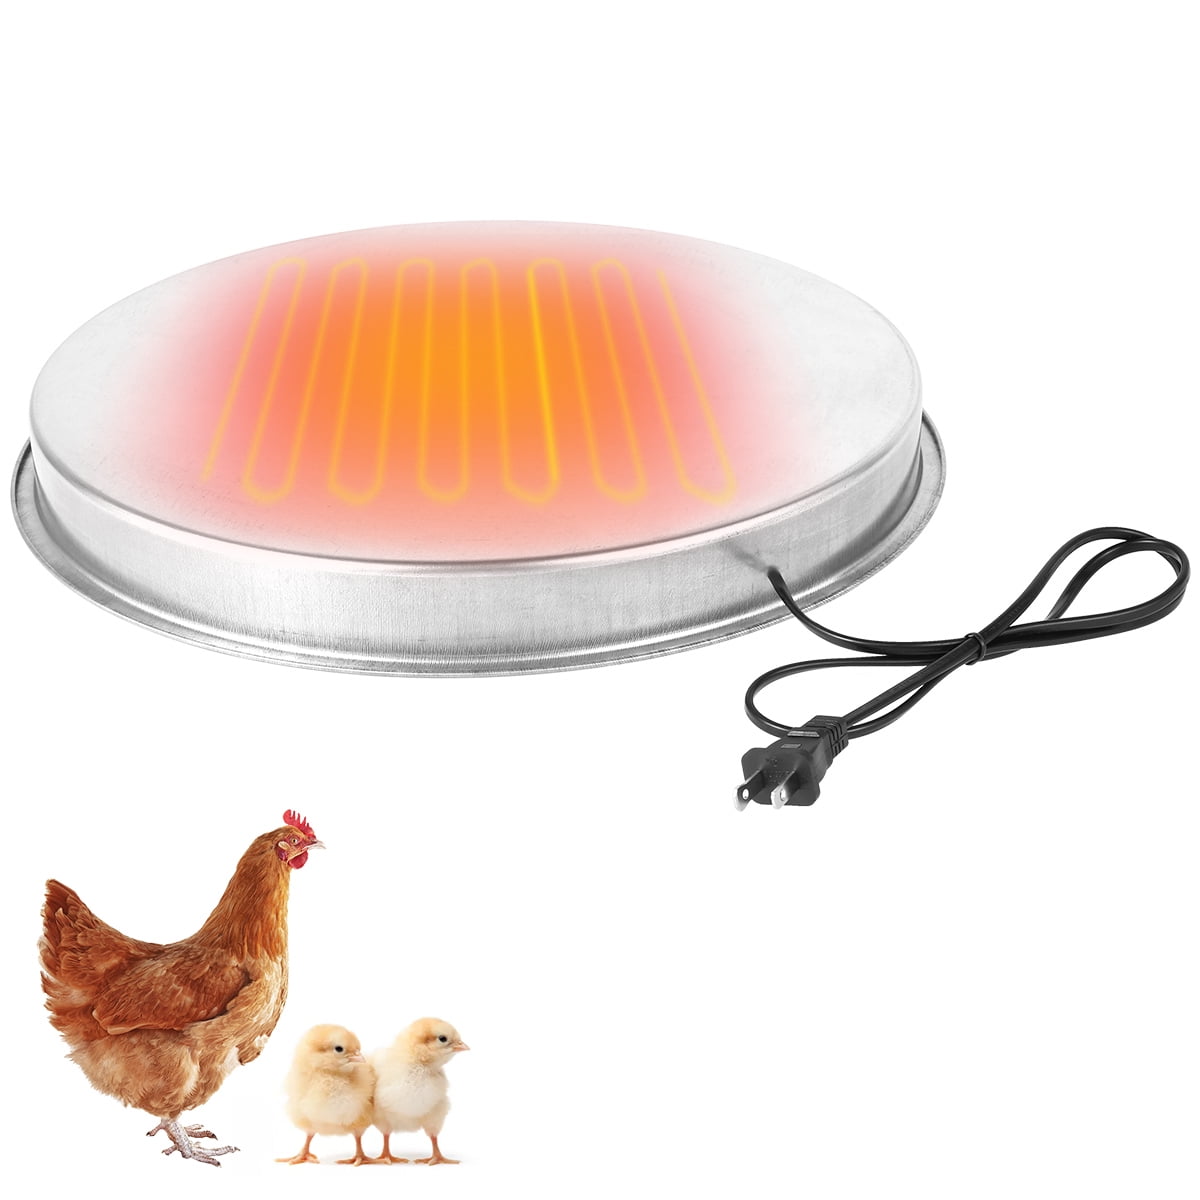 Aizami 125W Automatic Drinker Heater Base for Chicken Water Heater,15'' Diameter Heated Base for Plastic Metal Feeder,Winter Chicken House Tools Accessories 